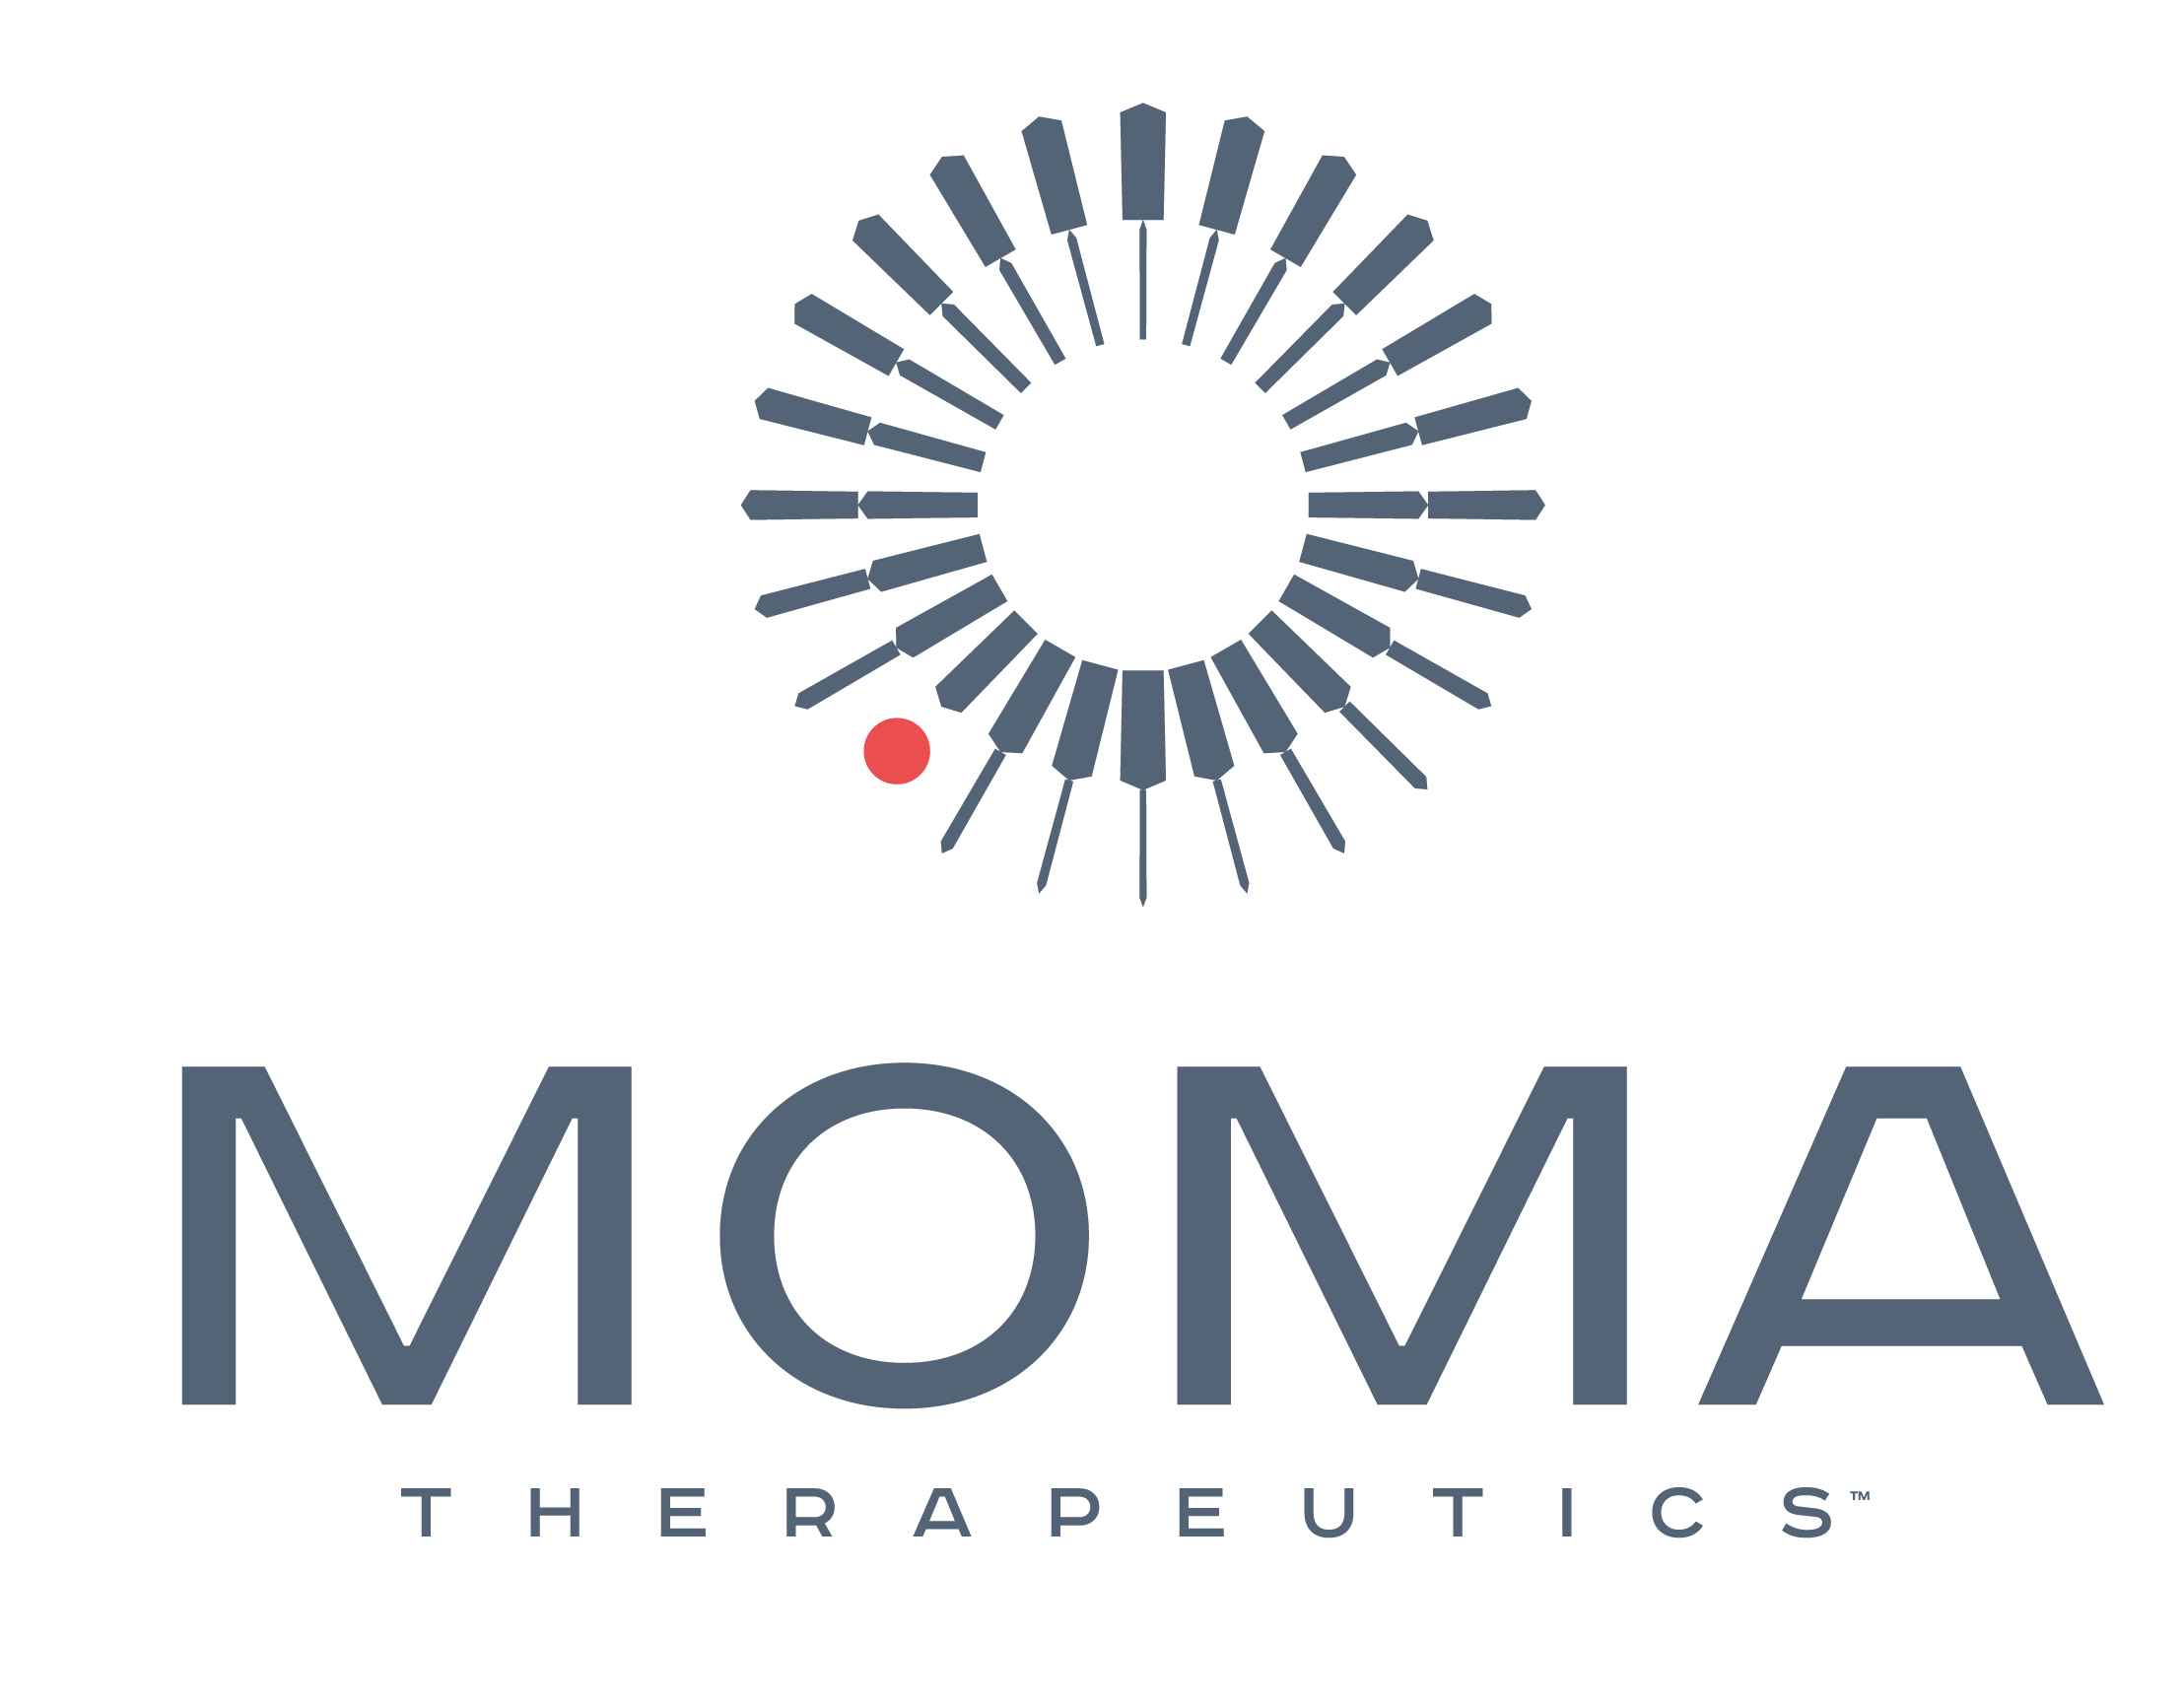 MOMA Therapeutics Appoints Asit Parikh, M.D., Ph.D. as President and Chief Executive Officer